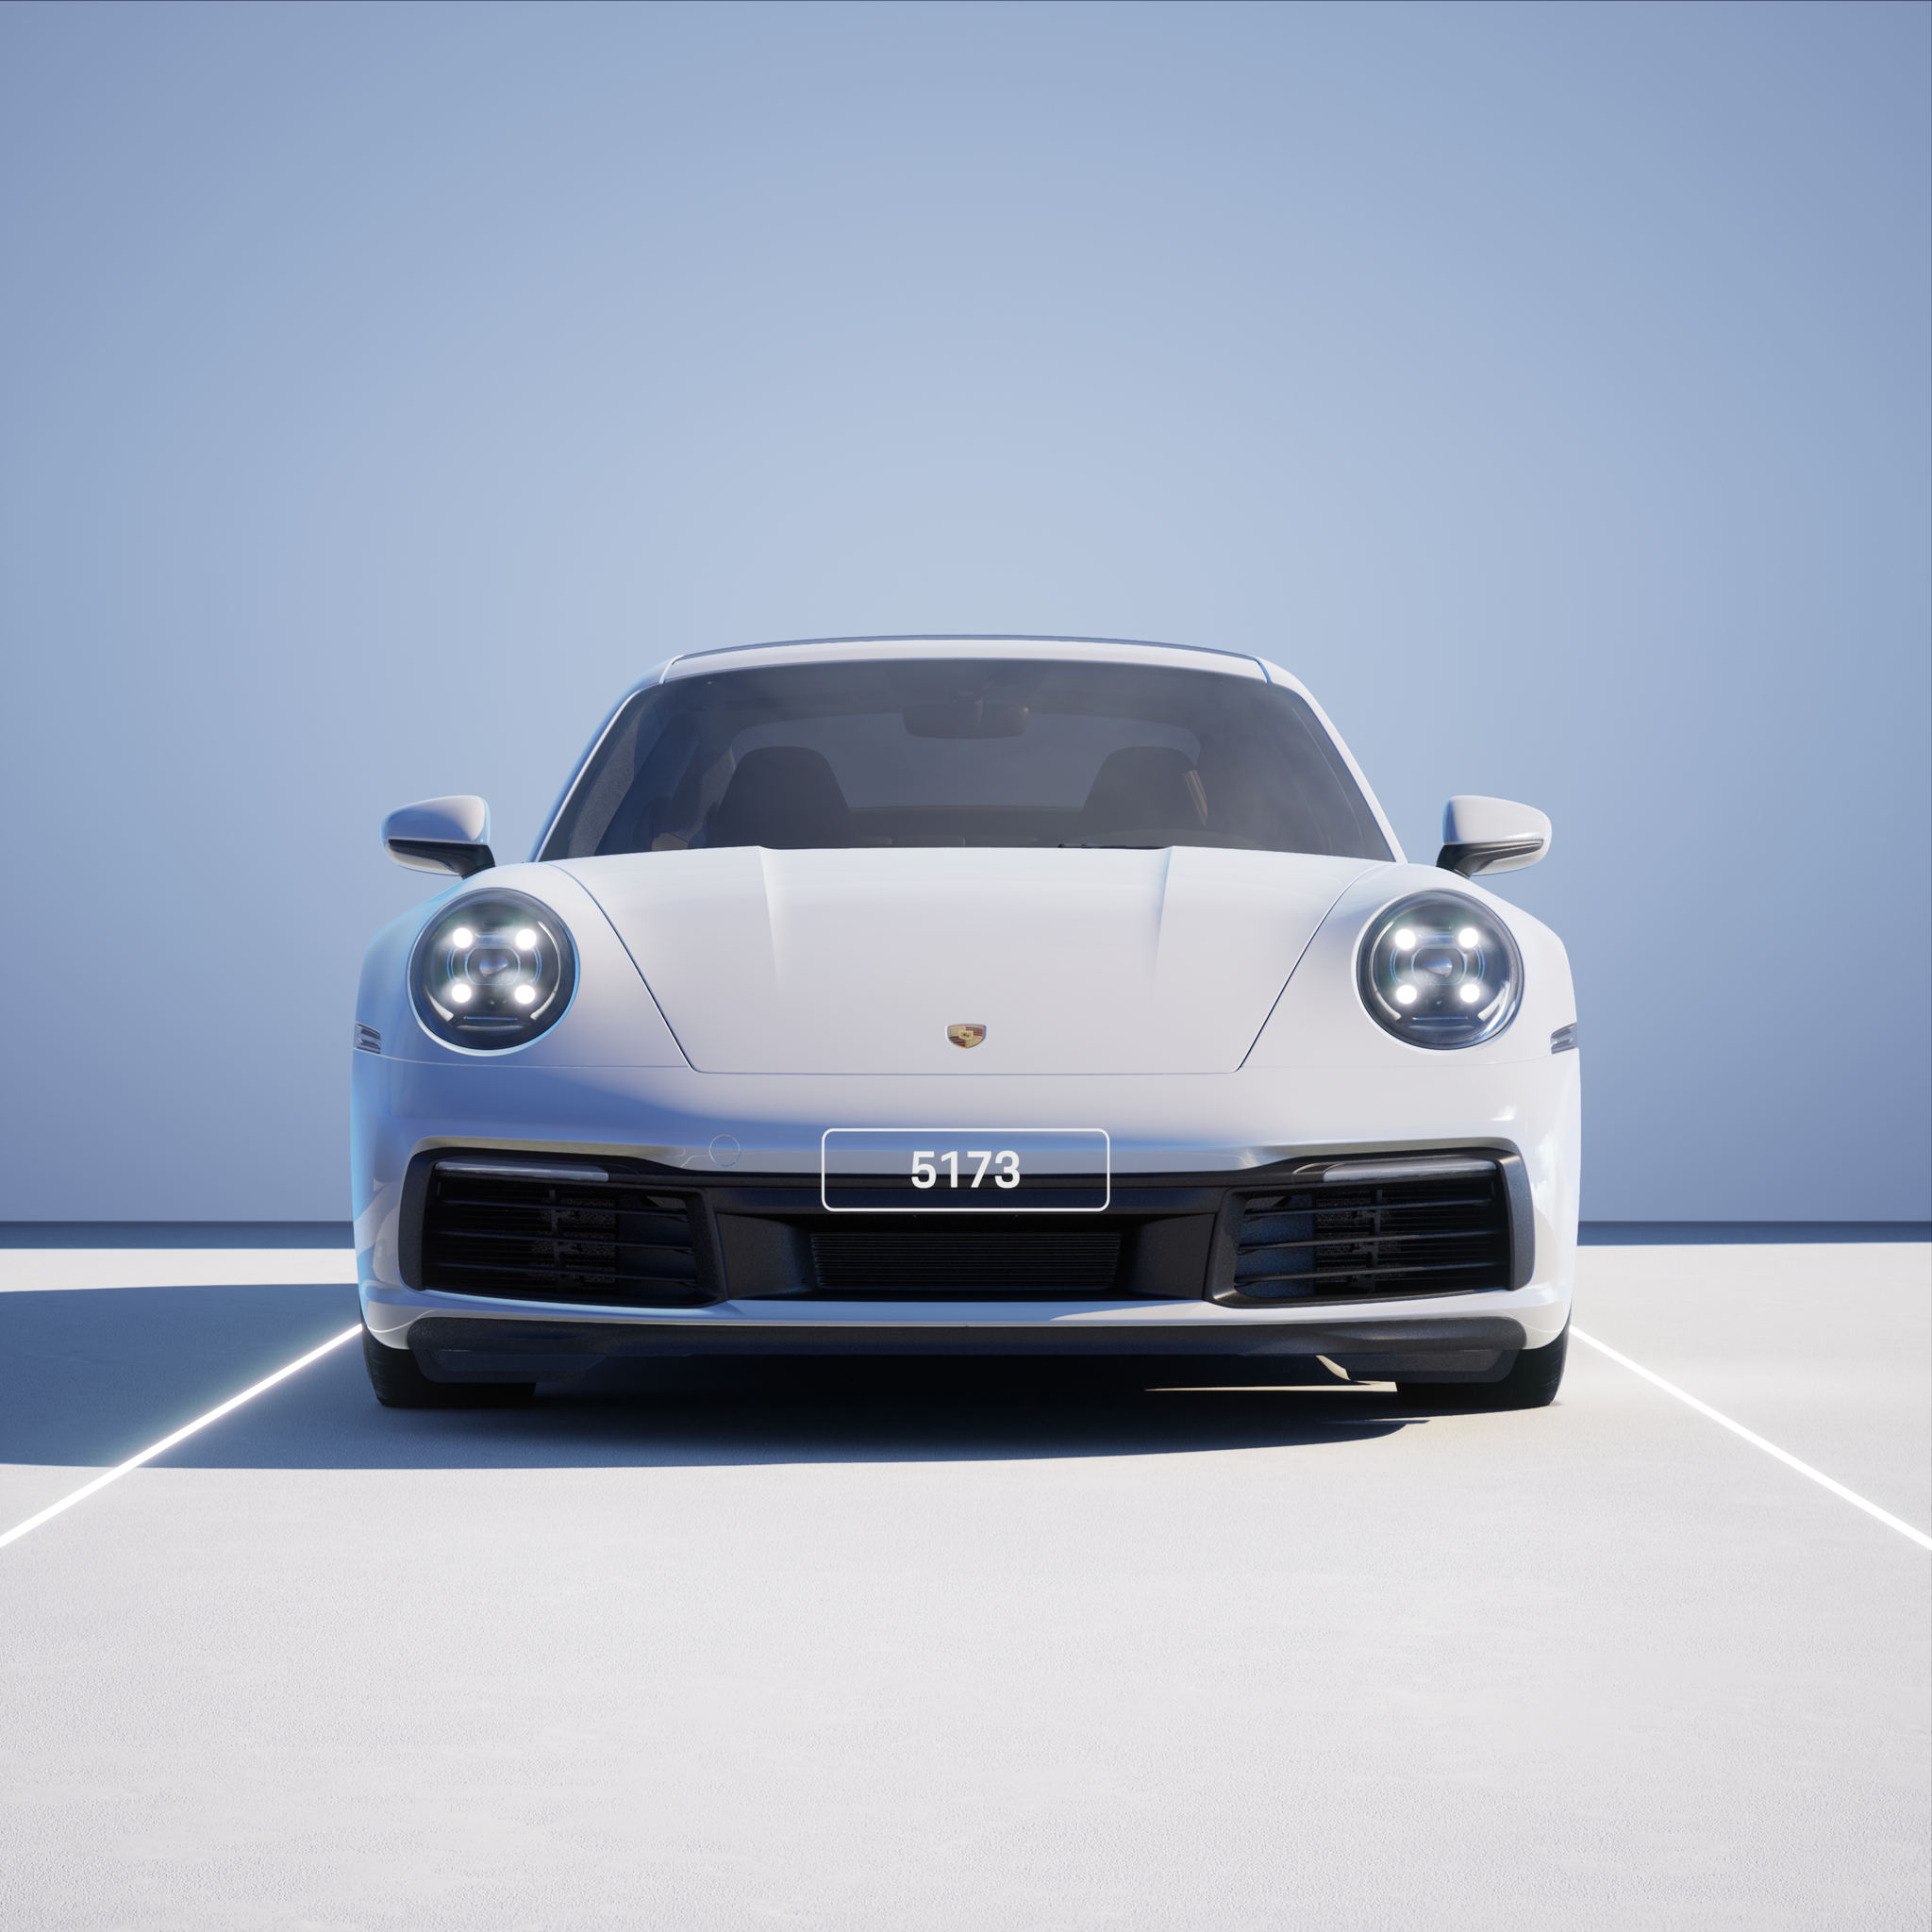 The PORSCHΞ 911 5173 image in phase